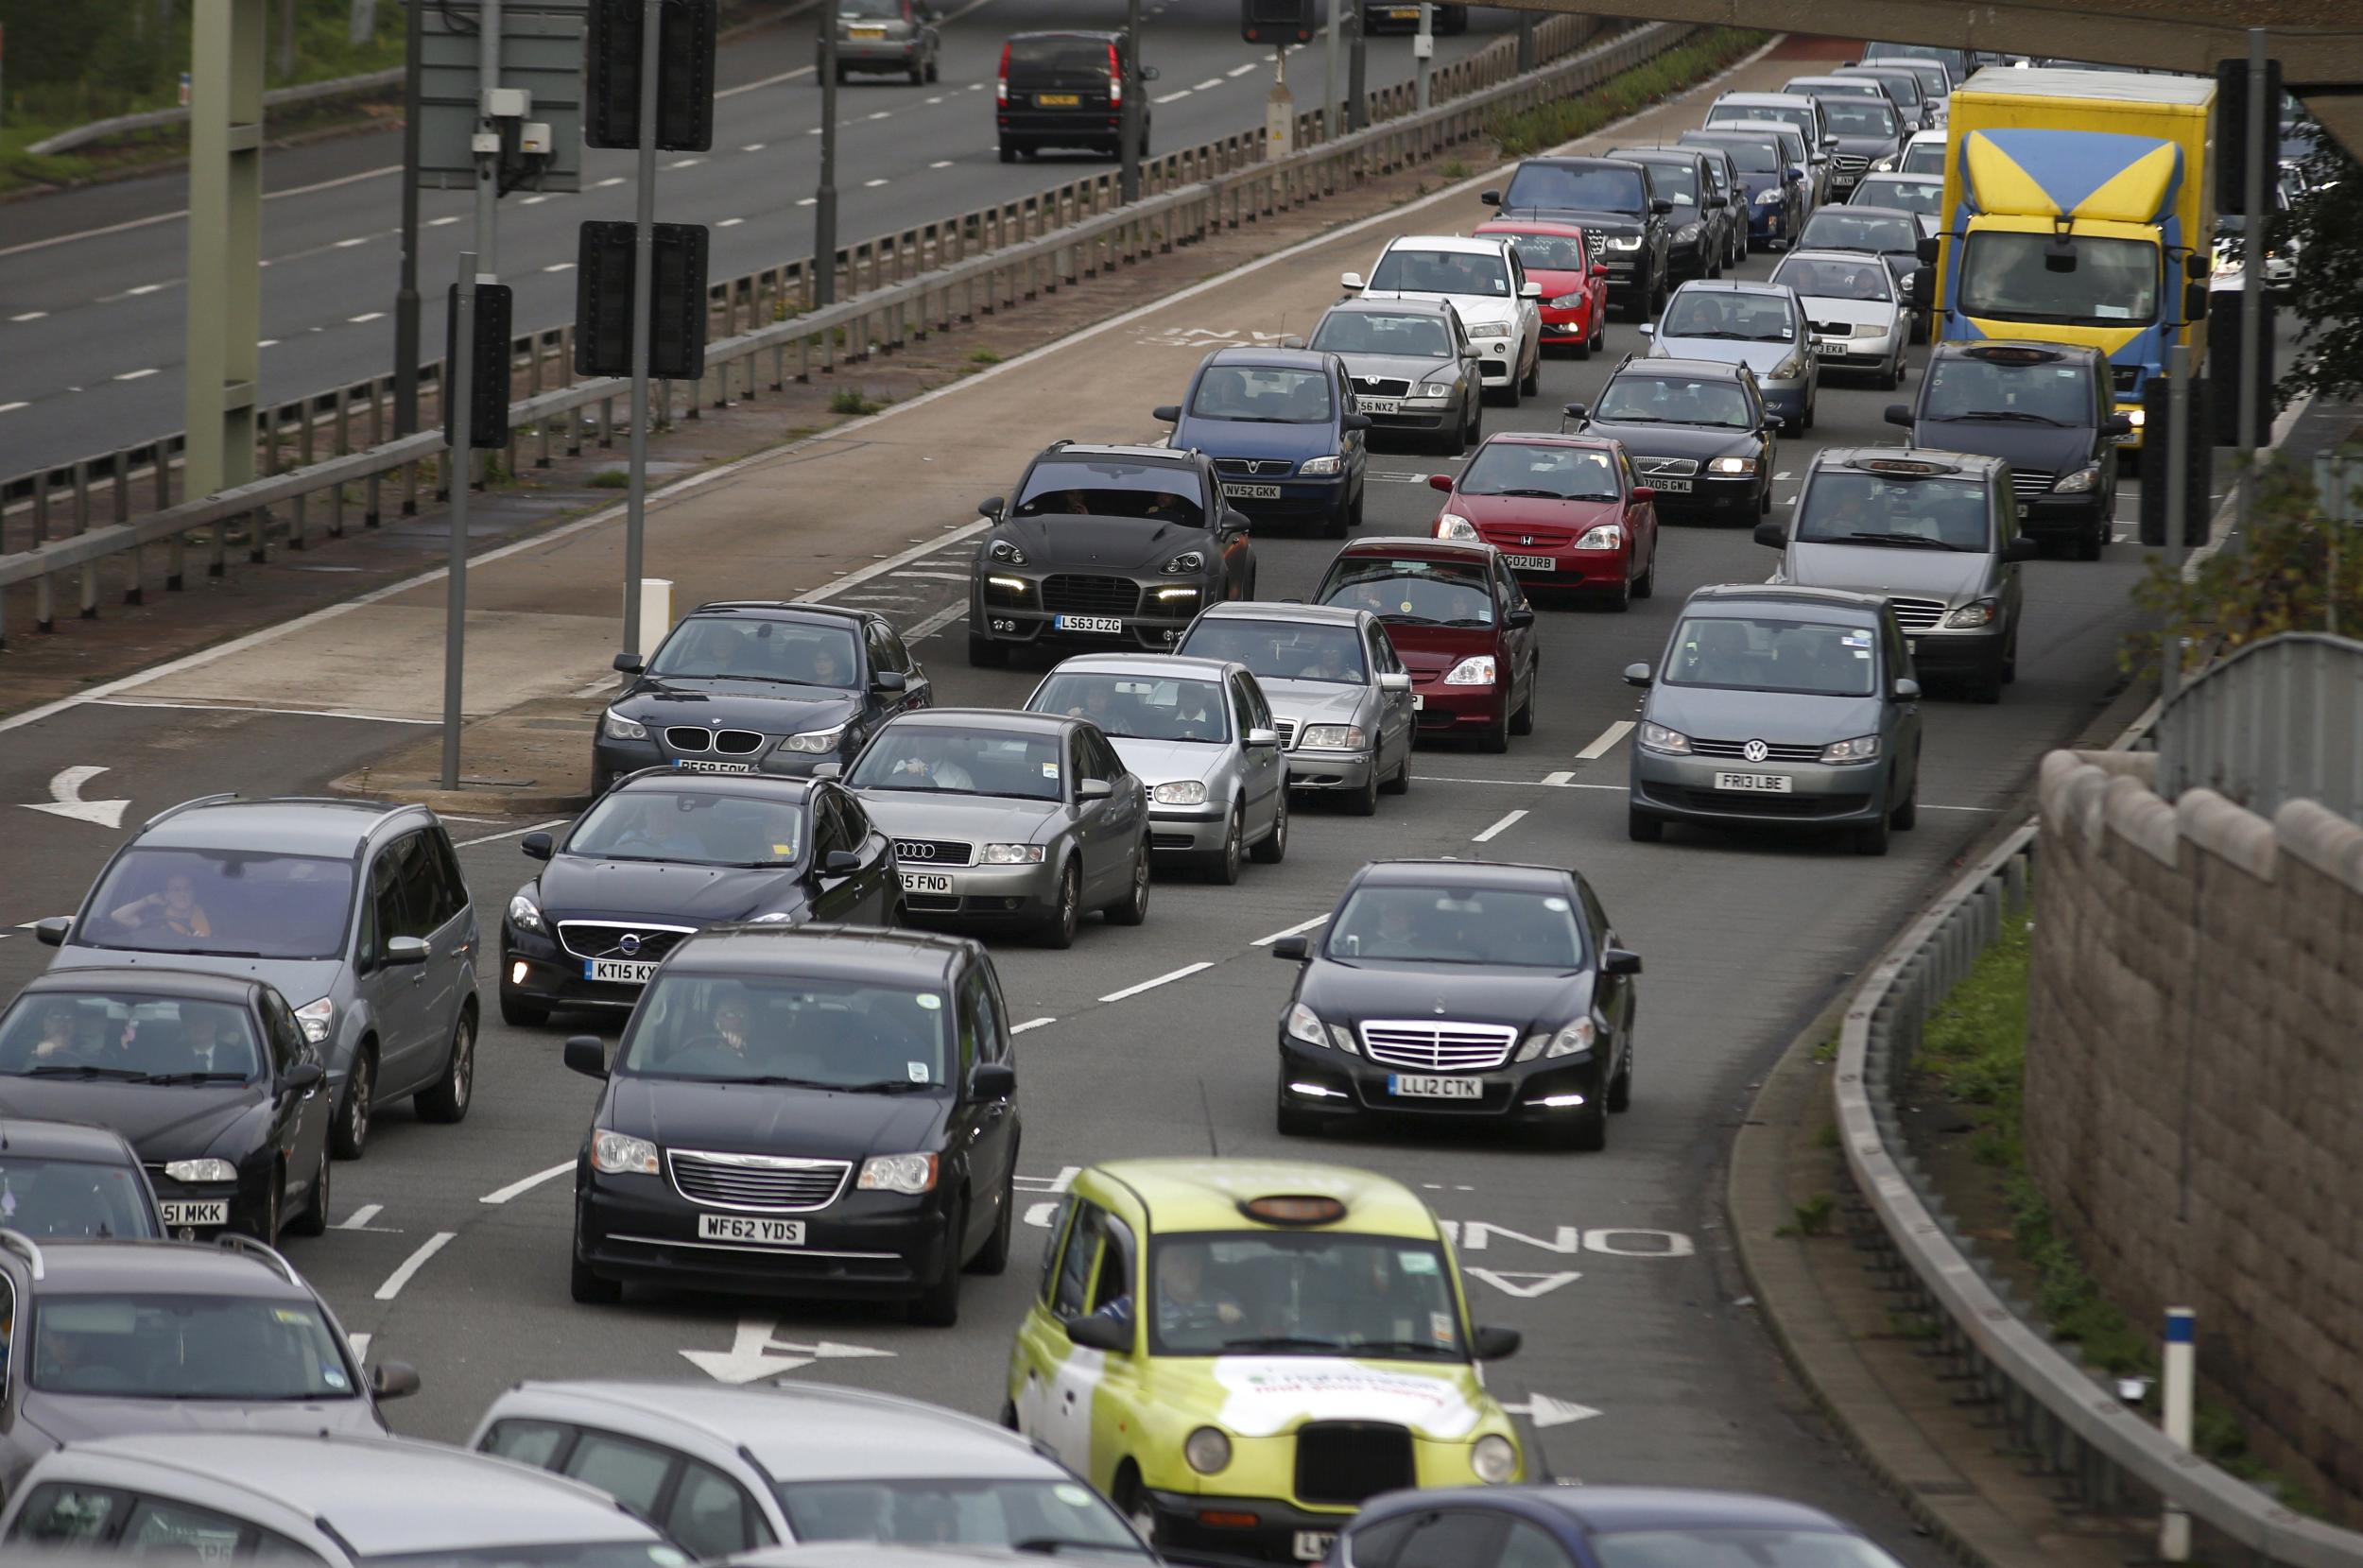 Traffic jams cost the UK millions of pounds each year